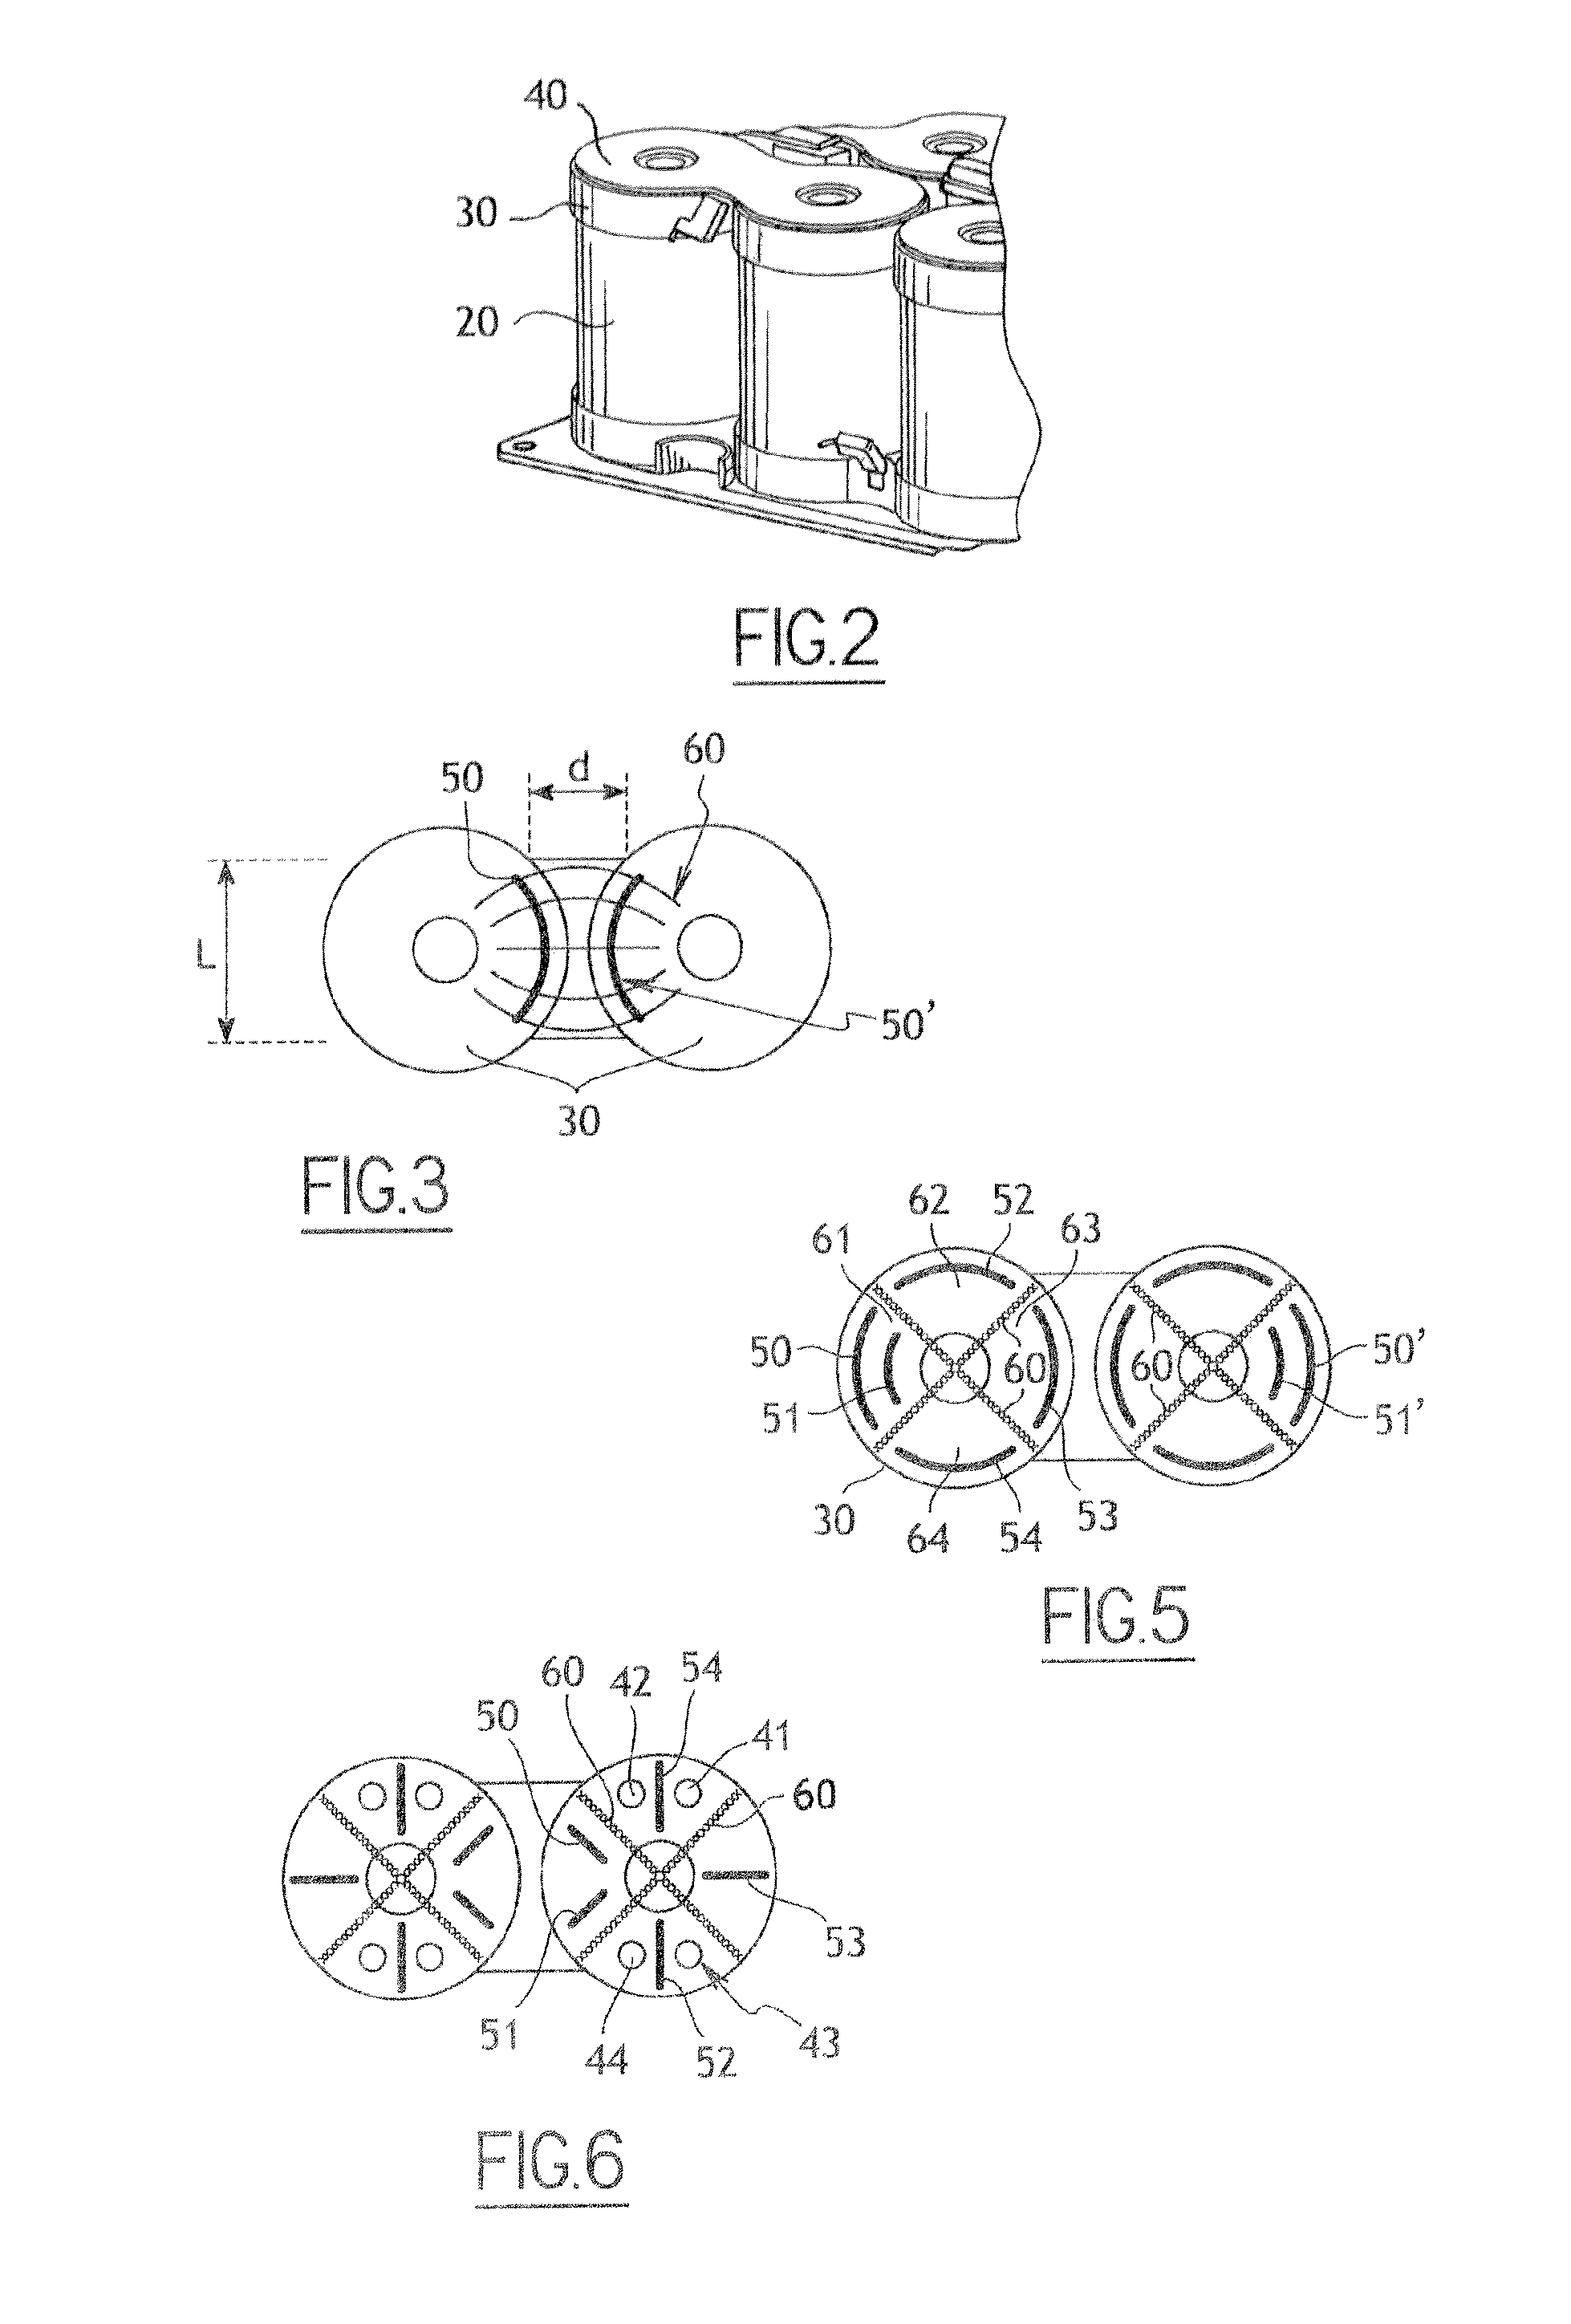 Module for electrical energy storage assemblies having a flat connecting strip